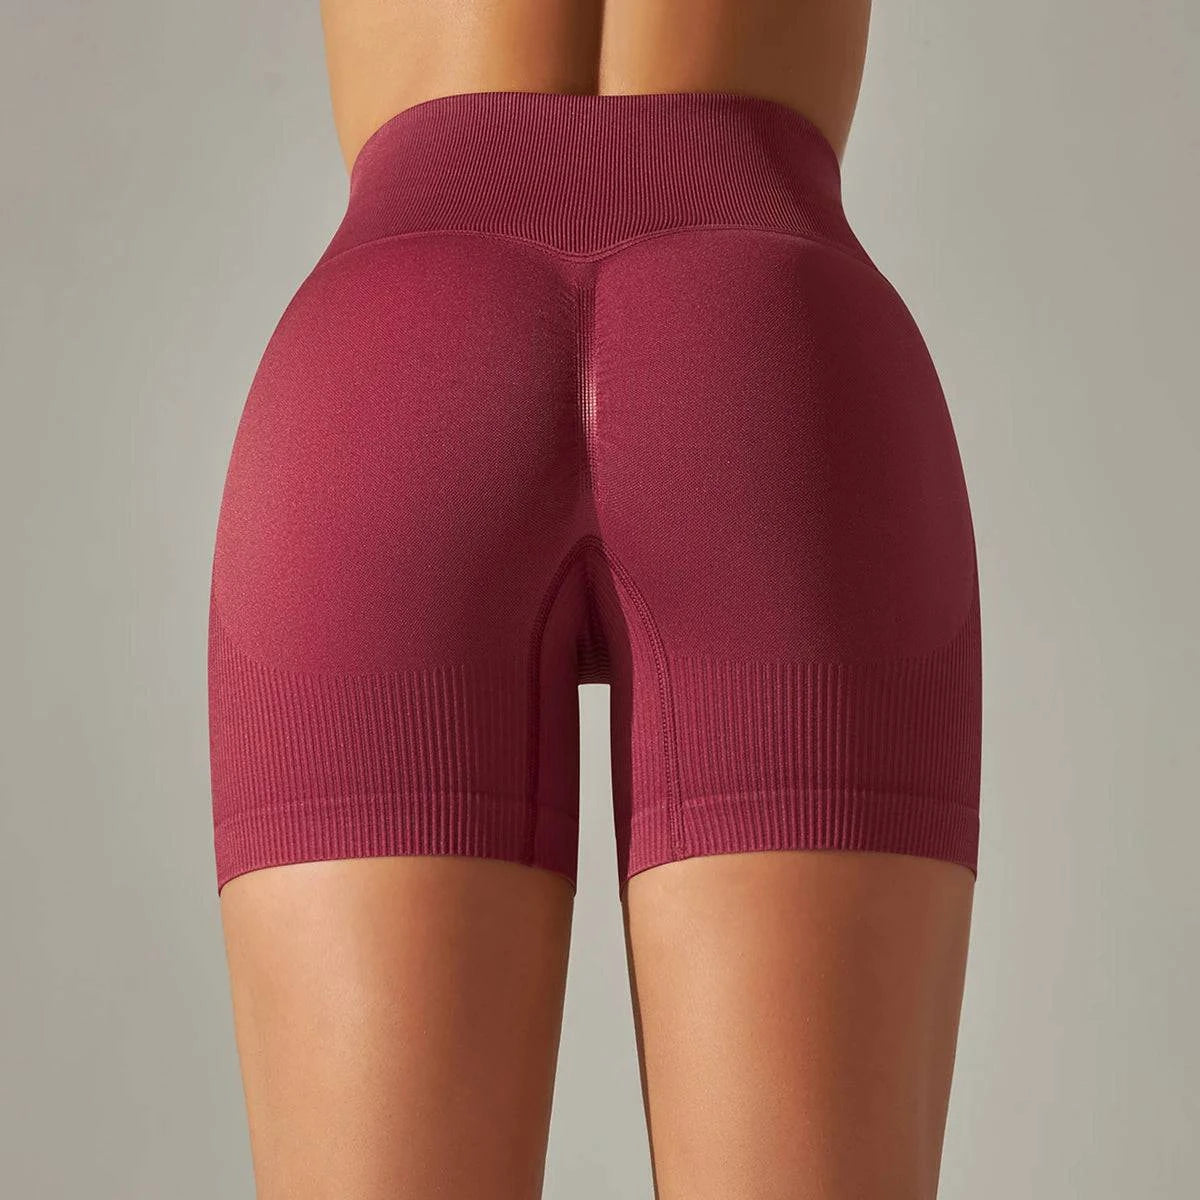 Woven Seamless Shorts - fitness store